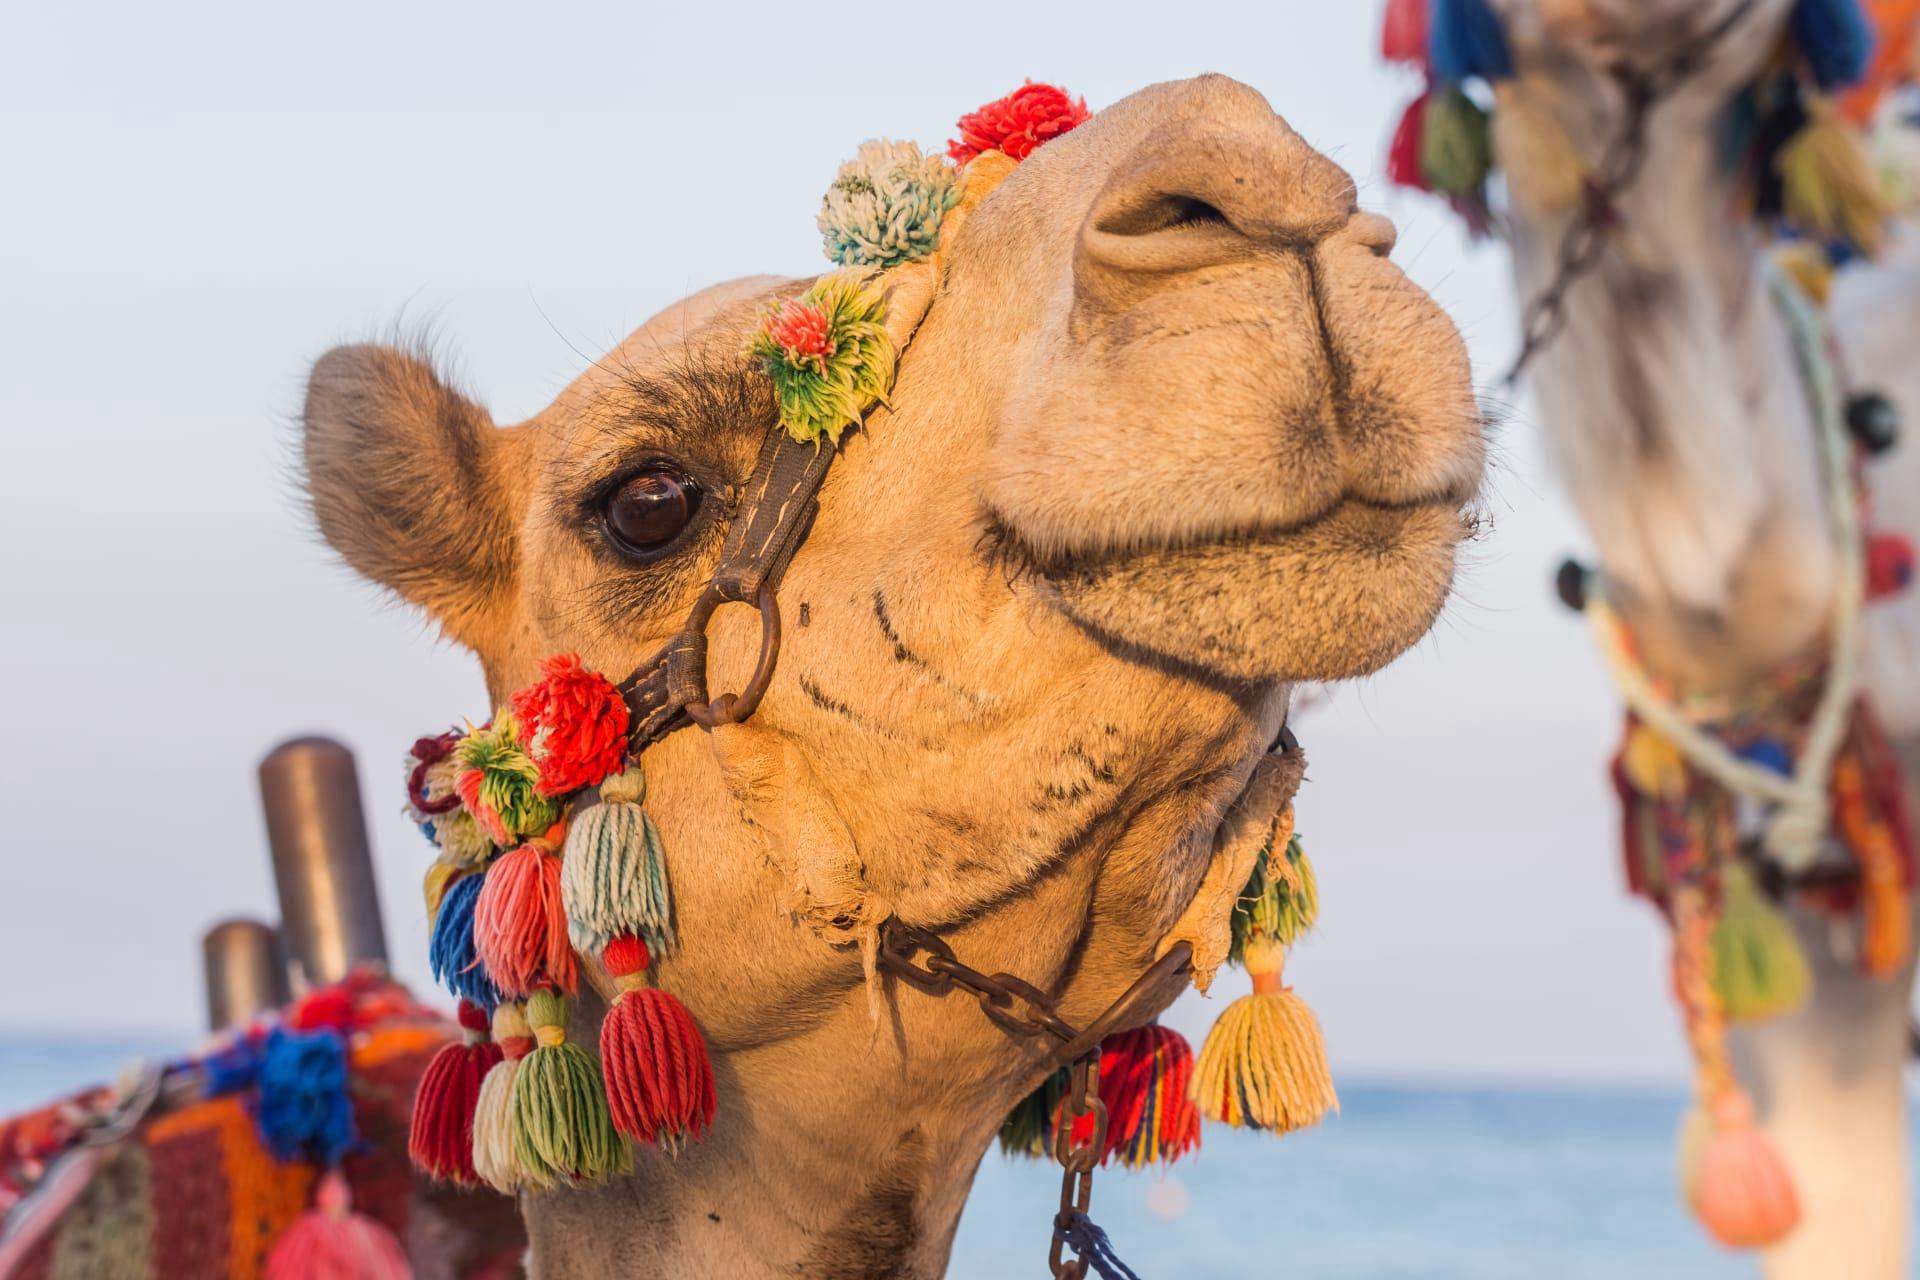 Camel pictures